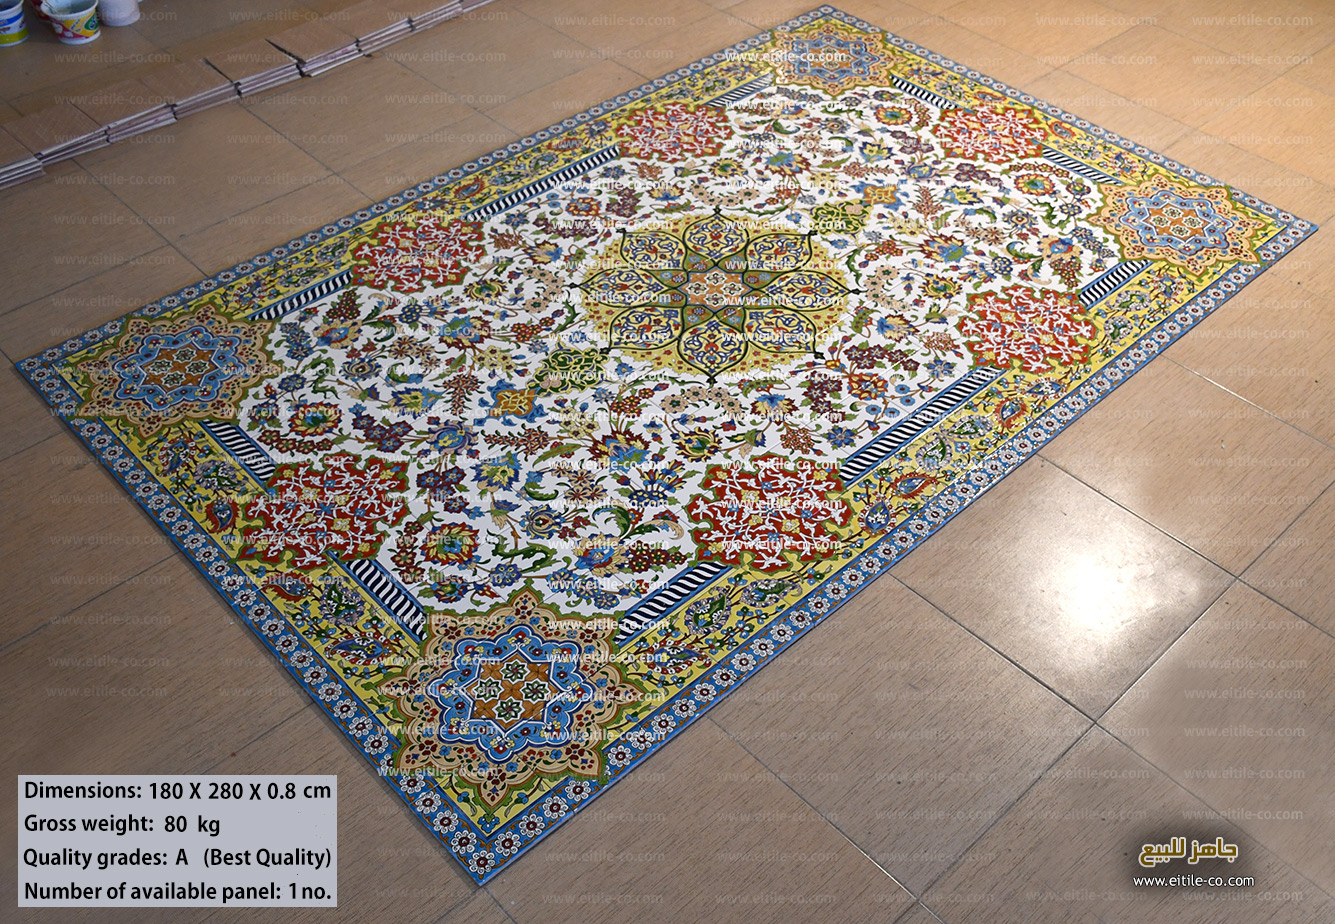 Ceramic tiles with carpet design ready for sale now, www.eitile-co.com